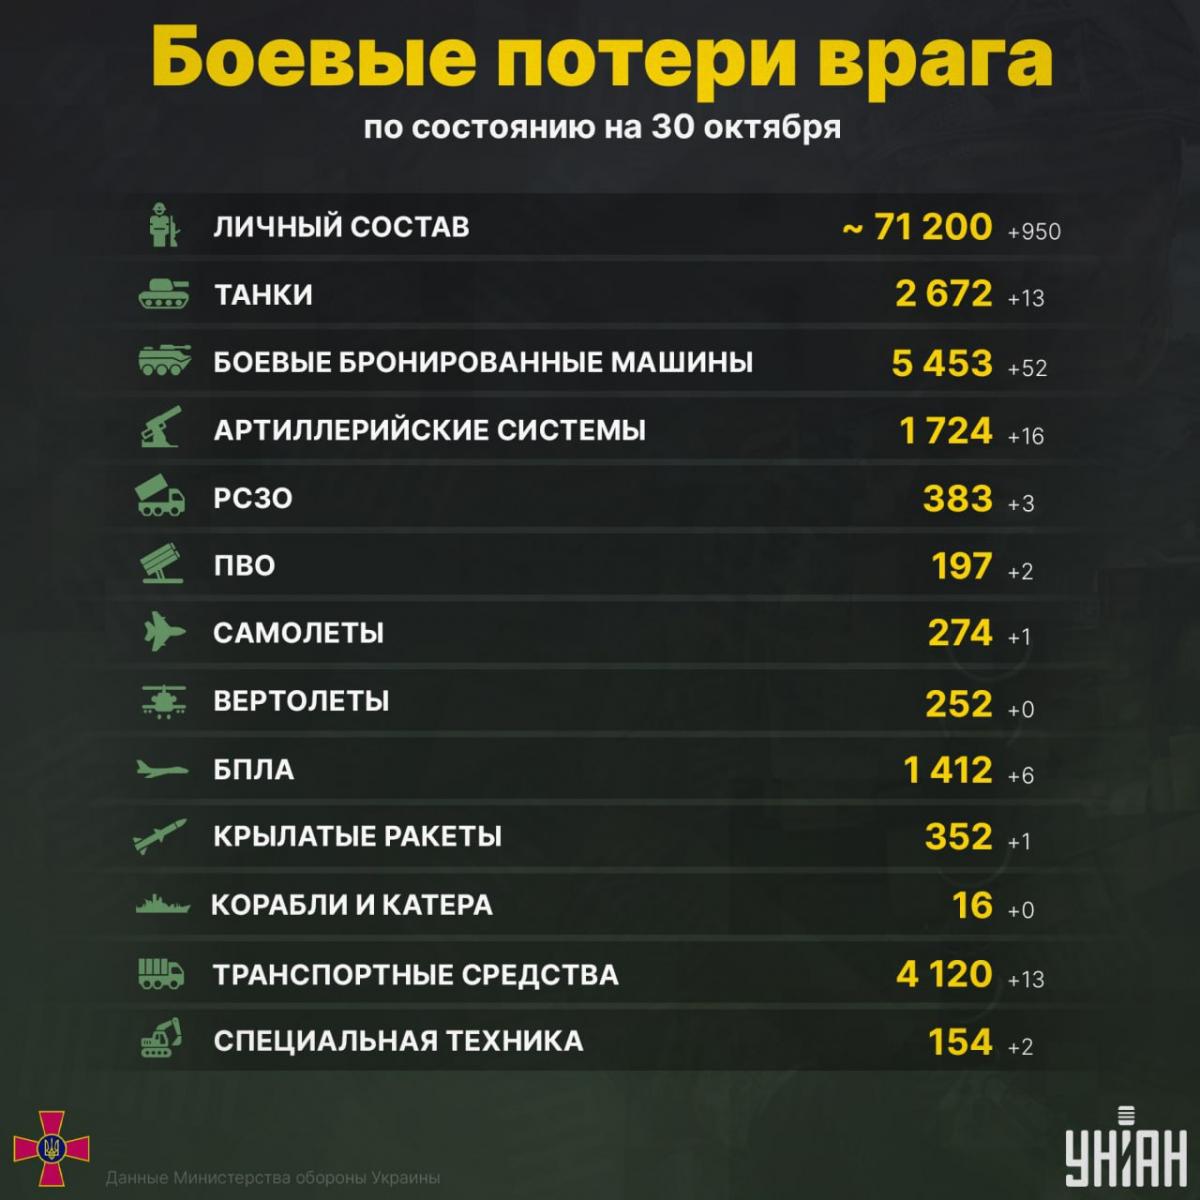 Combat losses of the Russian invaders as of October 30 / UNIAN infographic